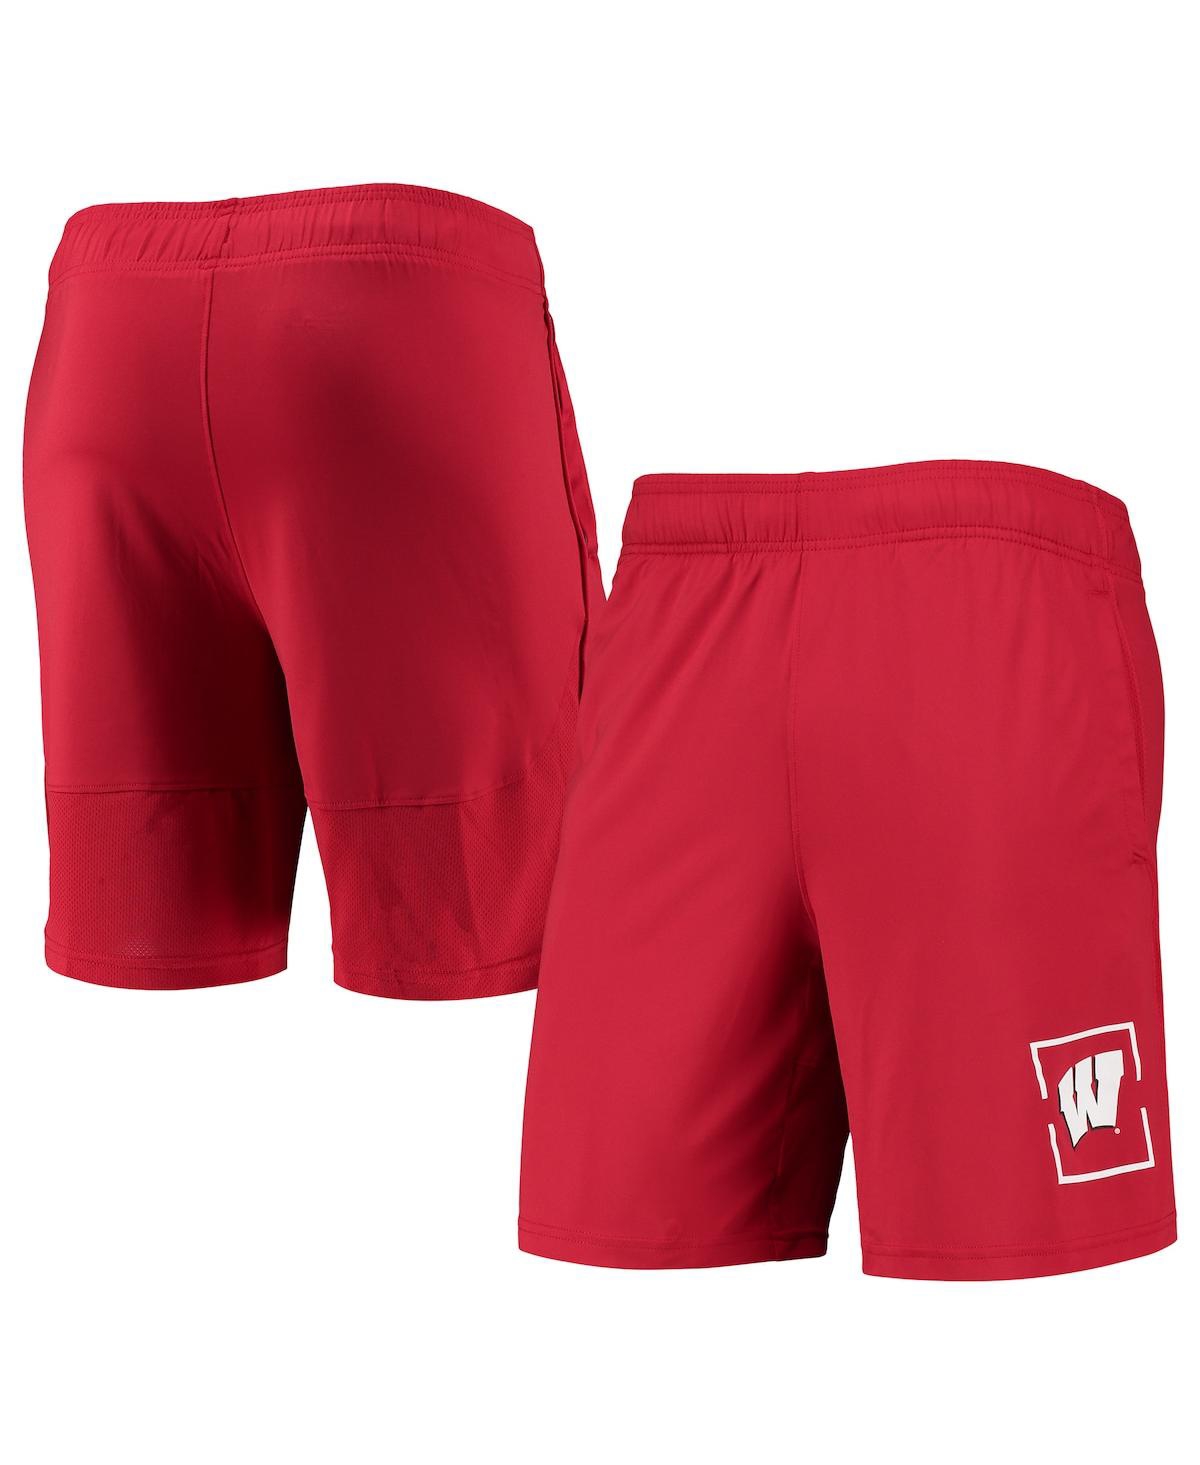 UNDER ARMOUR MEN'S UNDER ARMOUR RED WISCONSIN BADGERS MESH RAID PERFORMANCE SHORTS